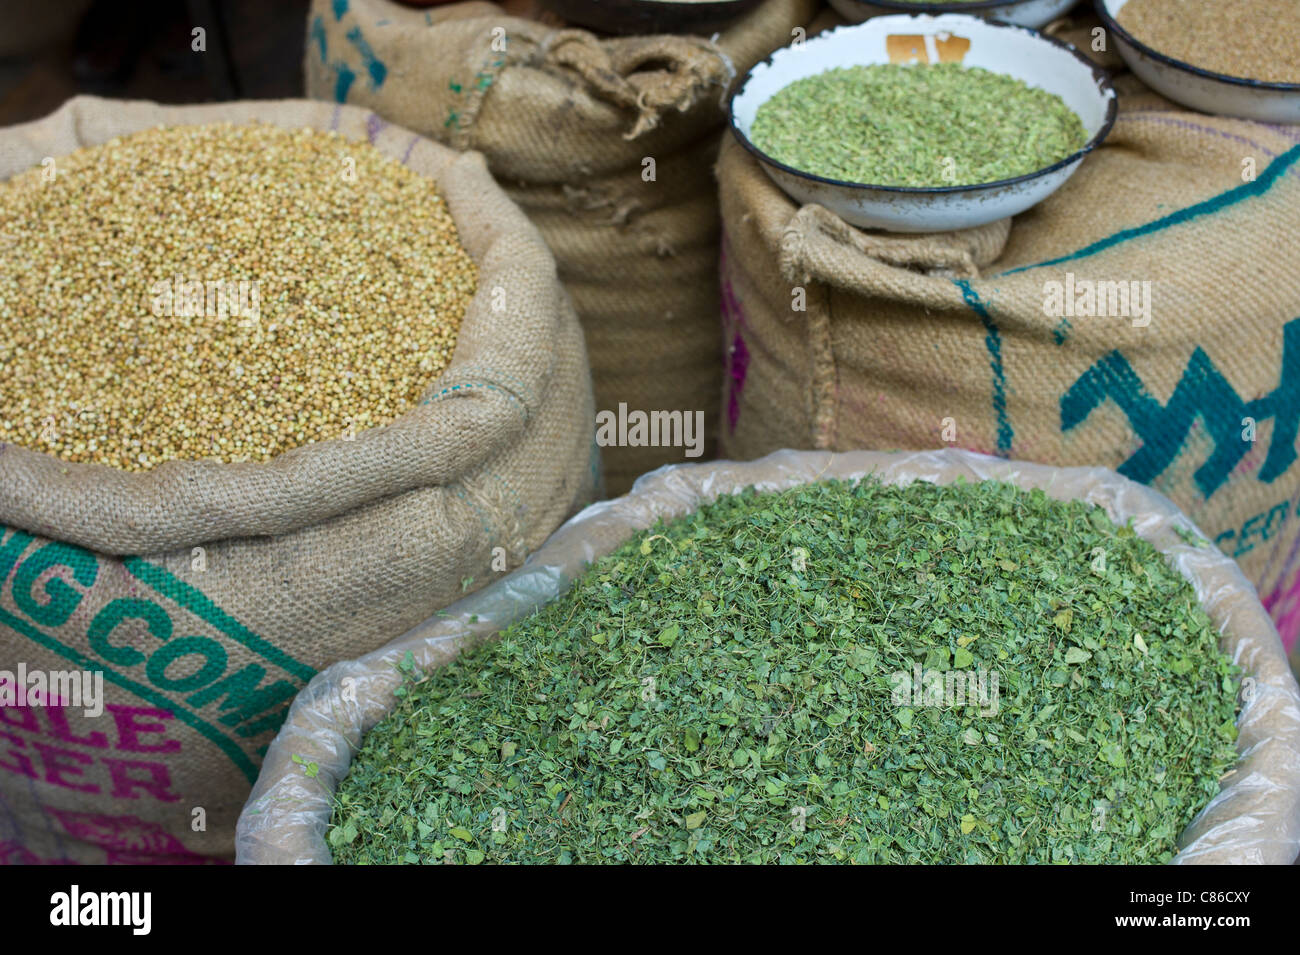 Coriander seeds and dried fenugreek leaves on sale at Khari Baoli spice and dried foods market, Old Delhi, India Stock Photo